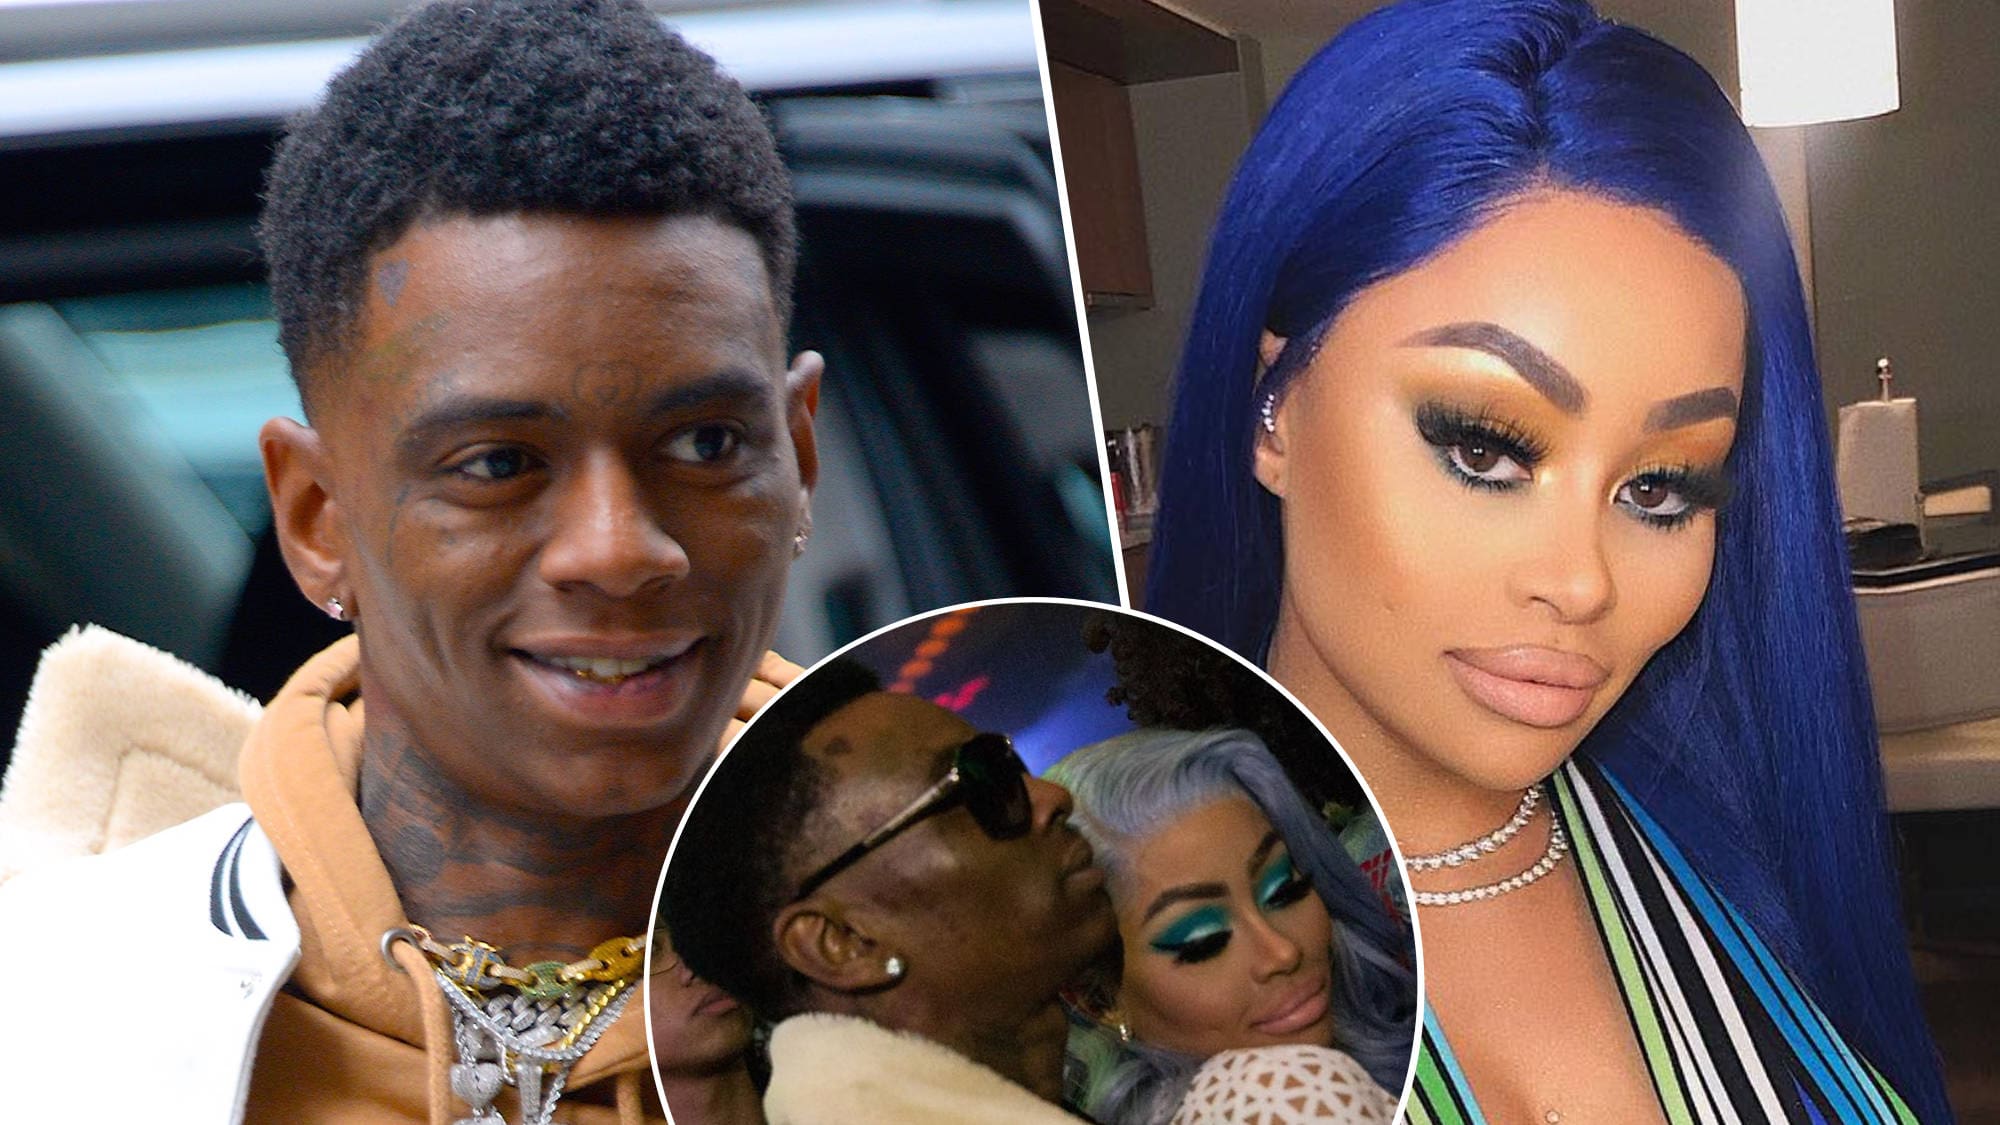 Soulja Boy Claims Blac Chyna Hacked His Phone And Tweeted An Apology To Herself In His Name